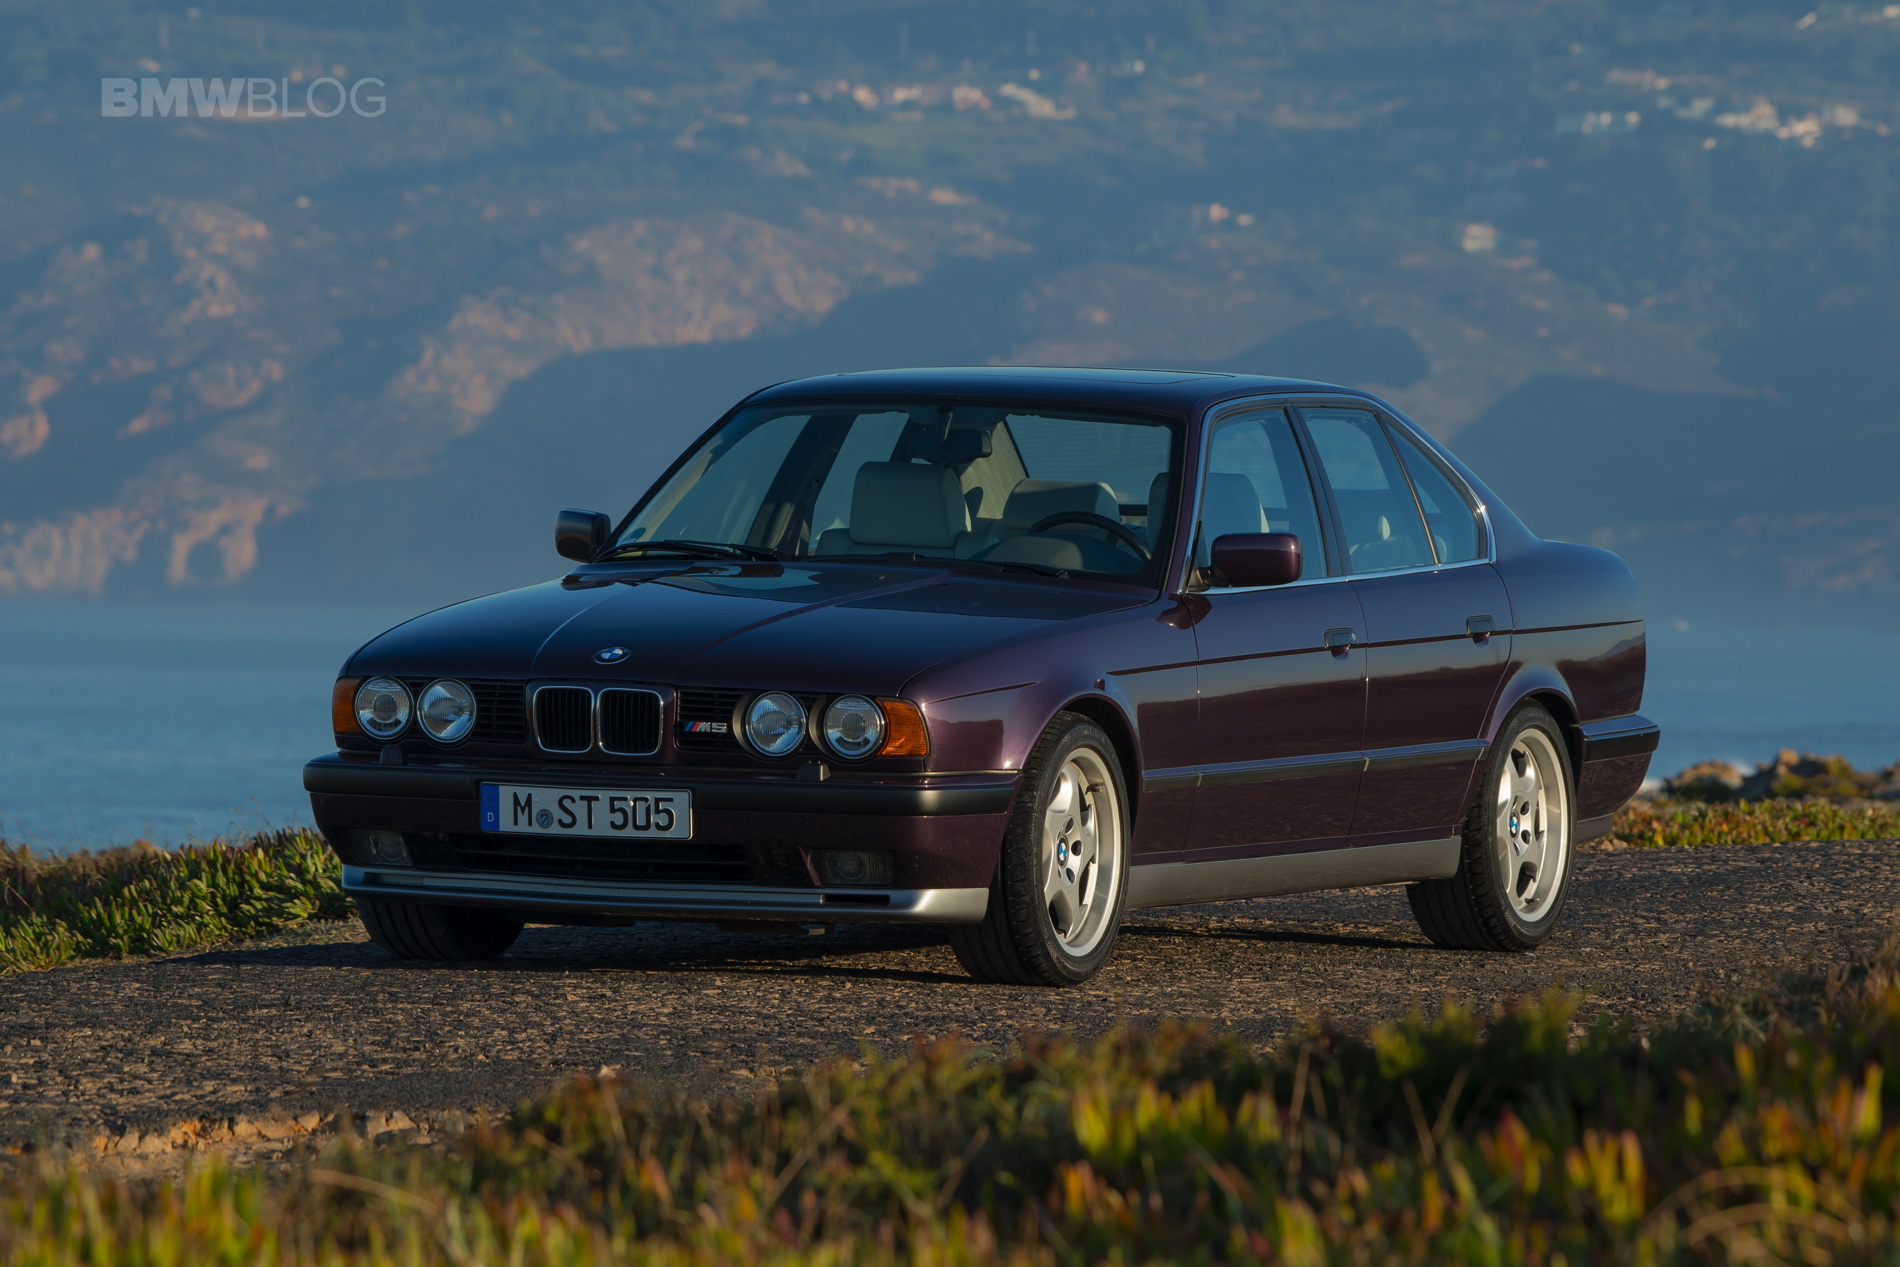 Photoshoot with the BMW E34 M5